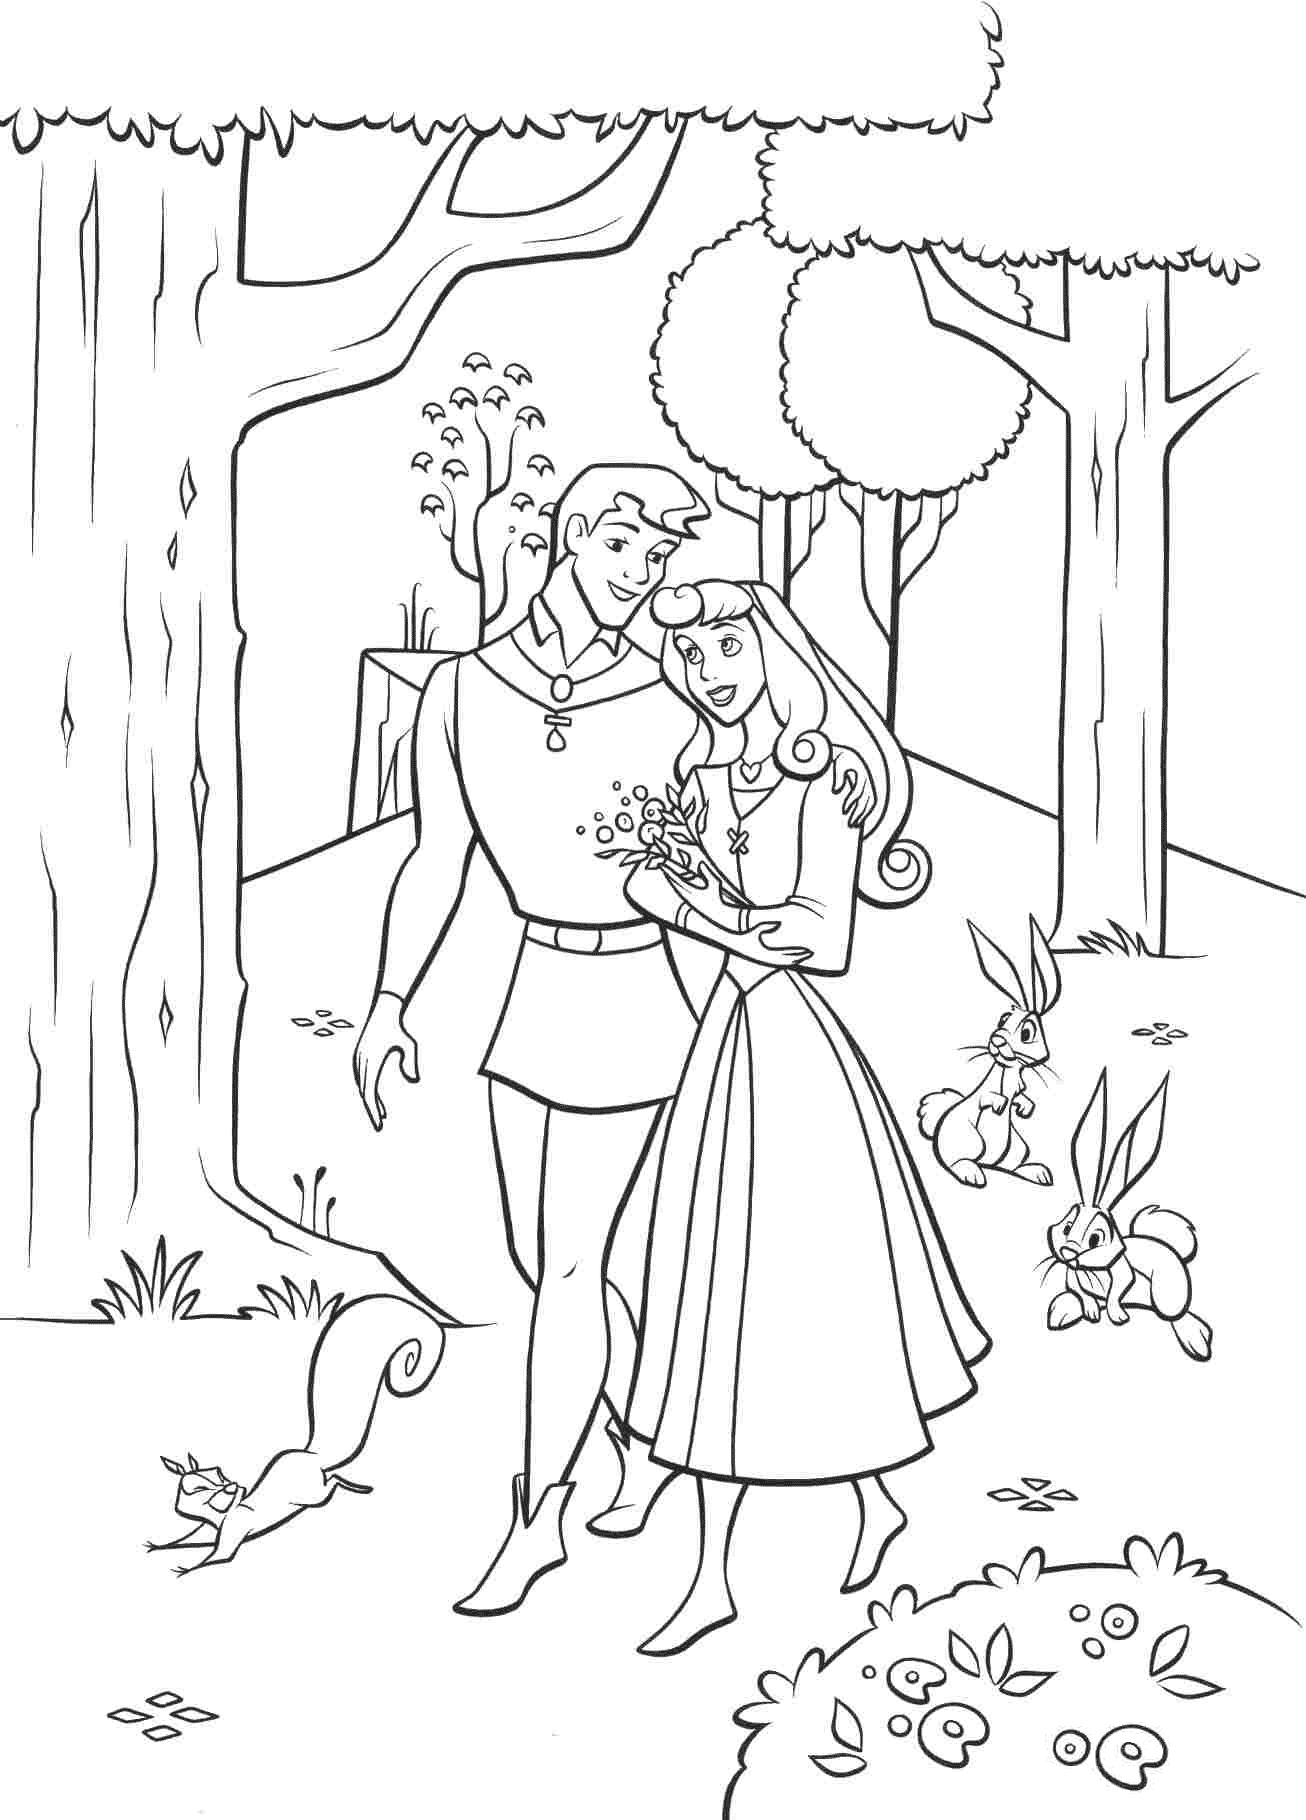 Phillip and Aurora are Falling in Love Coloring Page